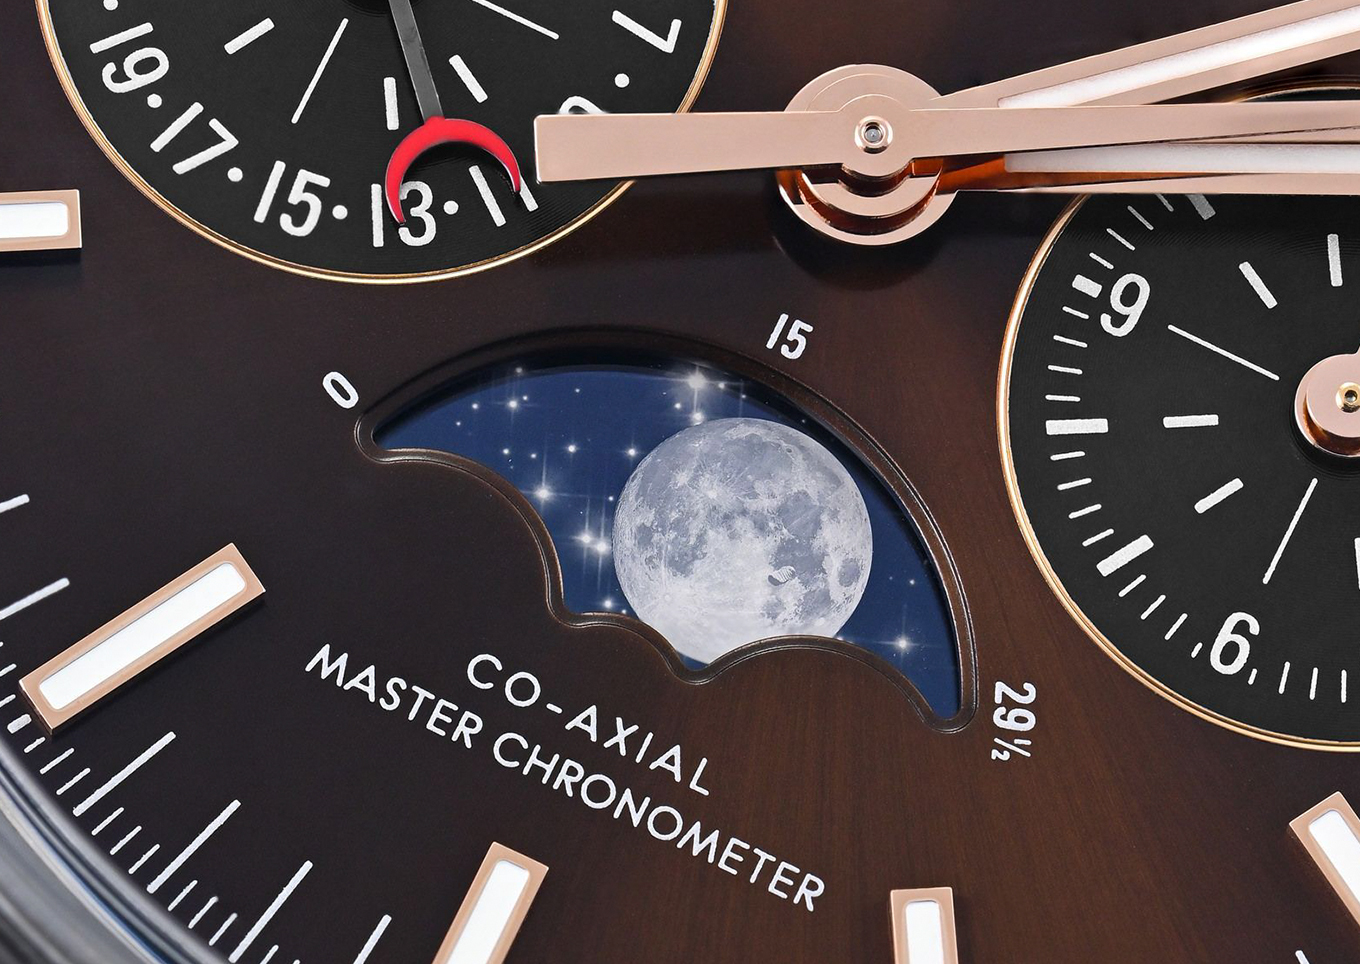 Omega Speedmaster with a moon phase complication and a Master Chronometer movement